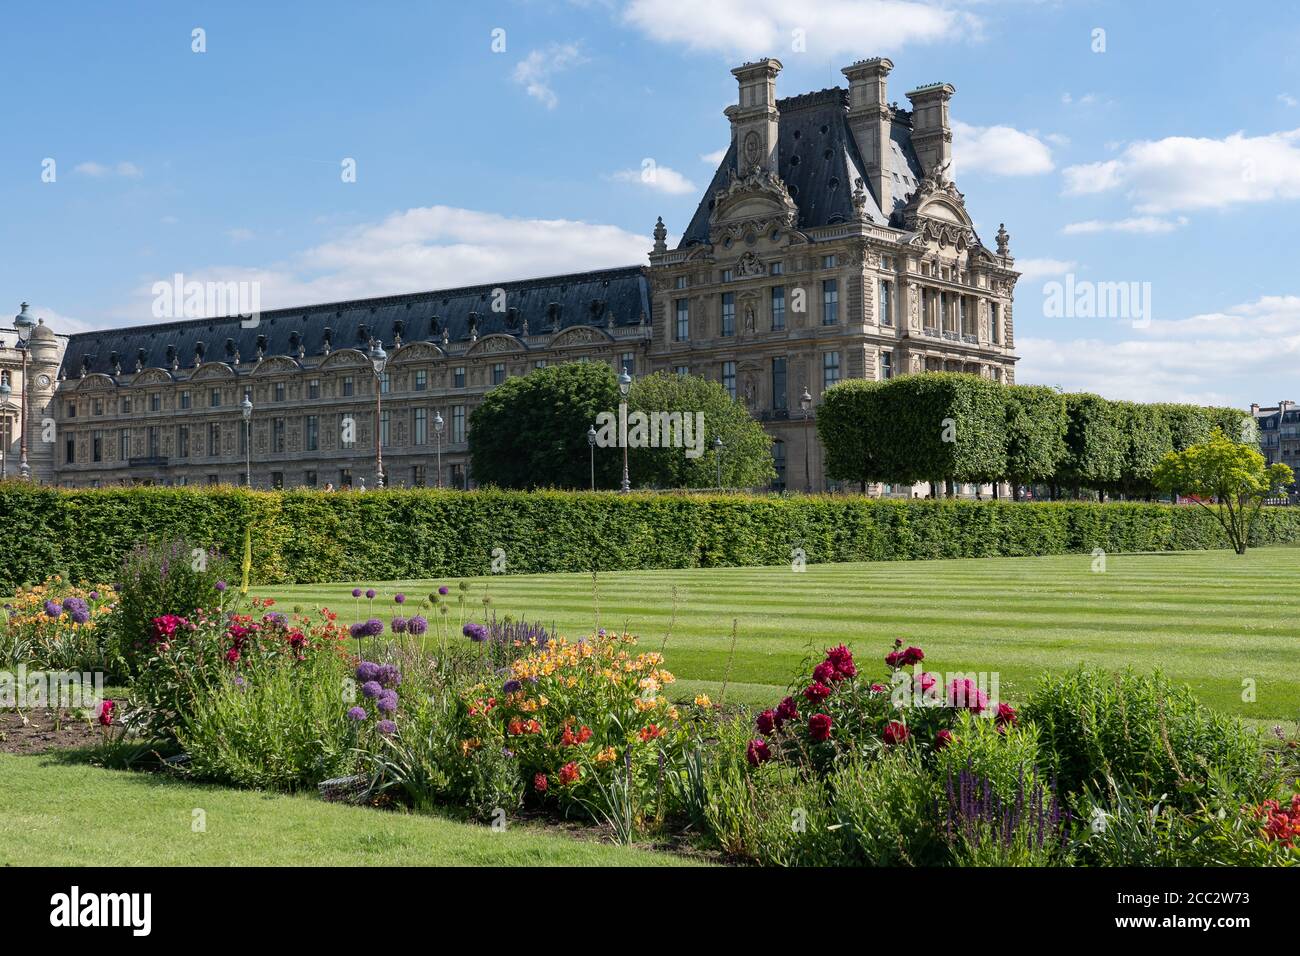 Pavillon de Marsan. Louvre palace museum with park, lawn and flowers at hot sunny day. Jardin des tuileries. Paris - France, 31. may 2019 Stock Photo